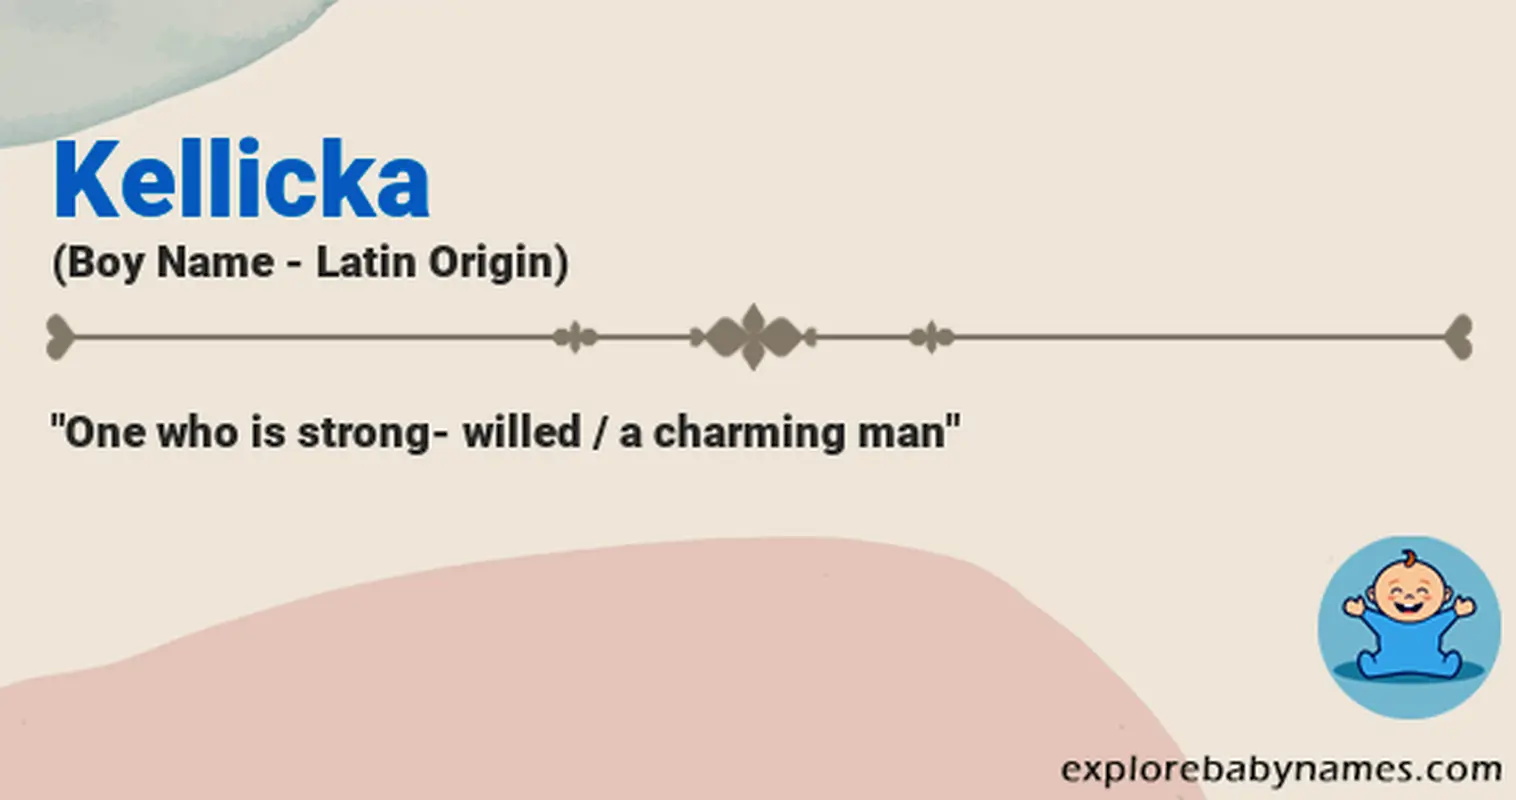 Meaning of Kellicka